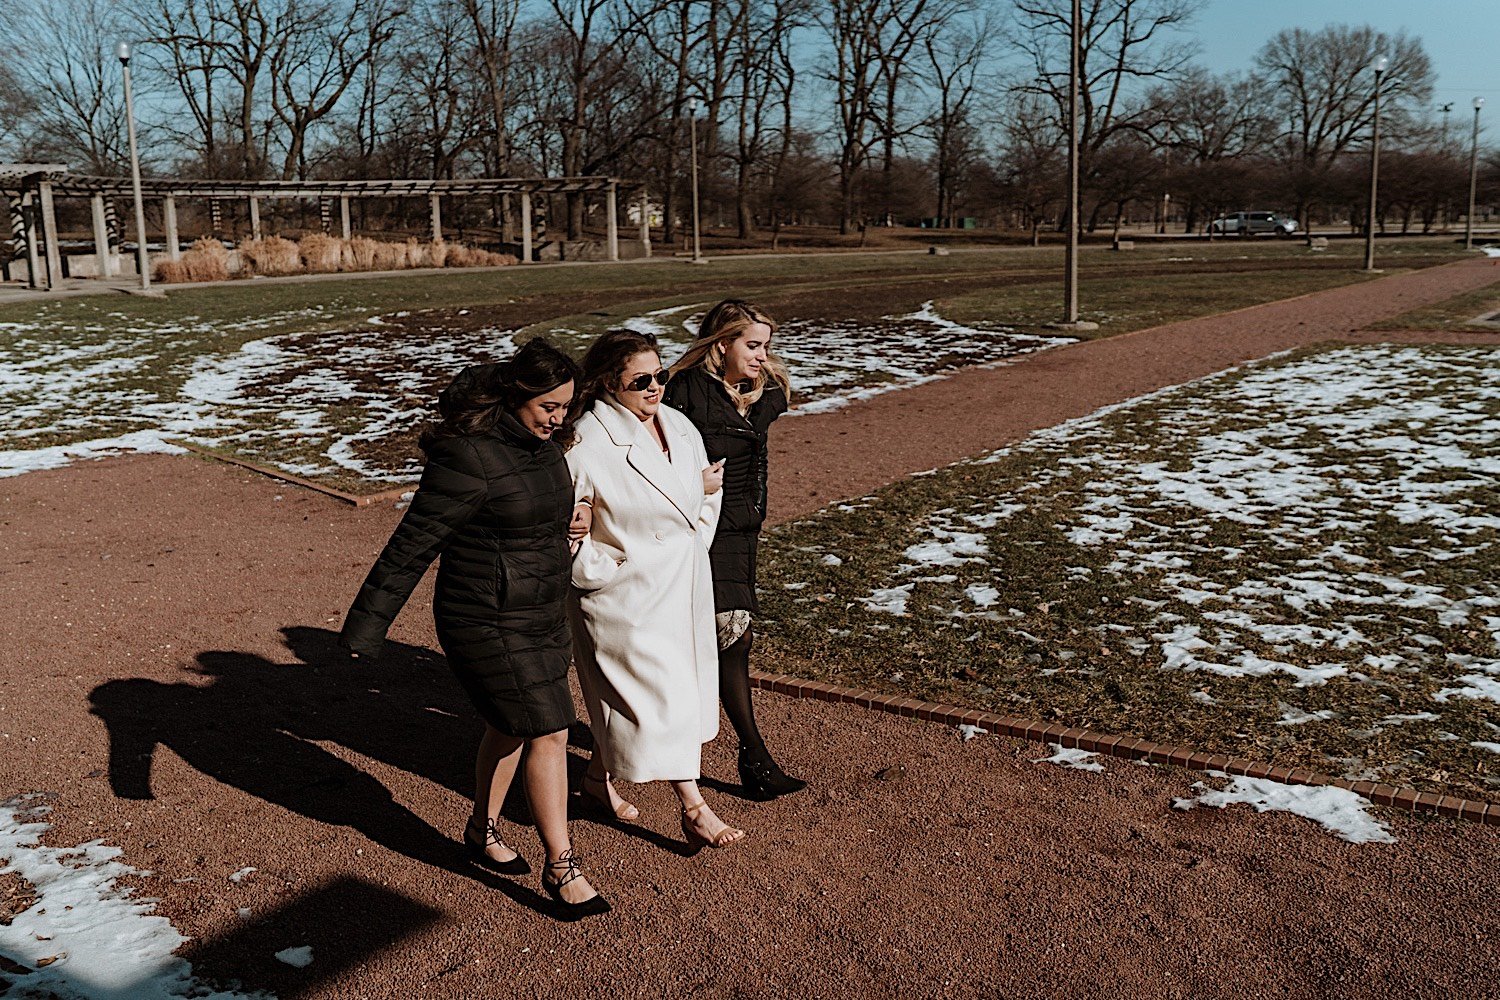 Bride walking in a park with her two bridesmaids accompanying her